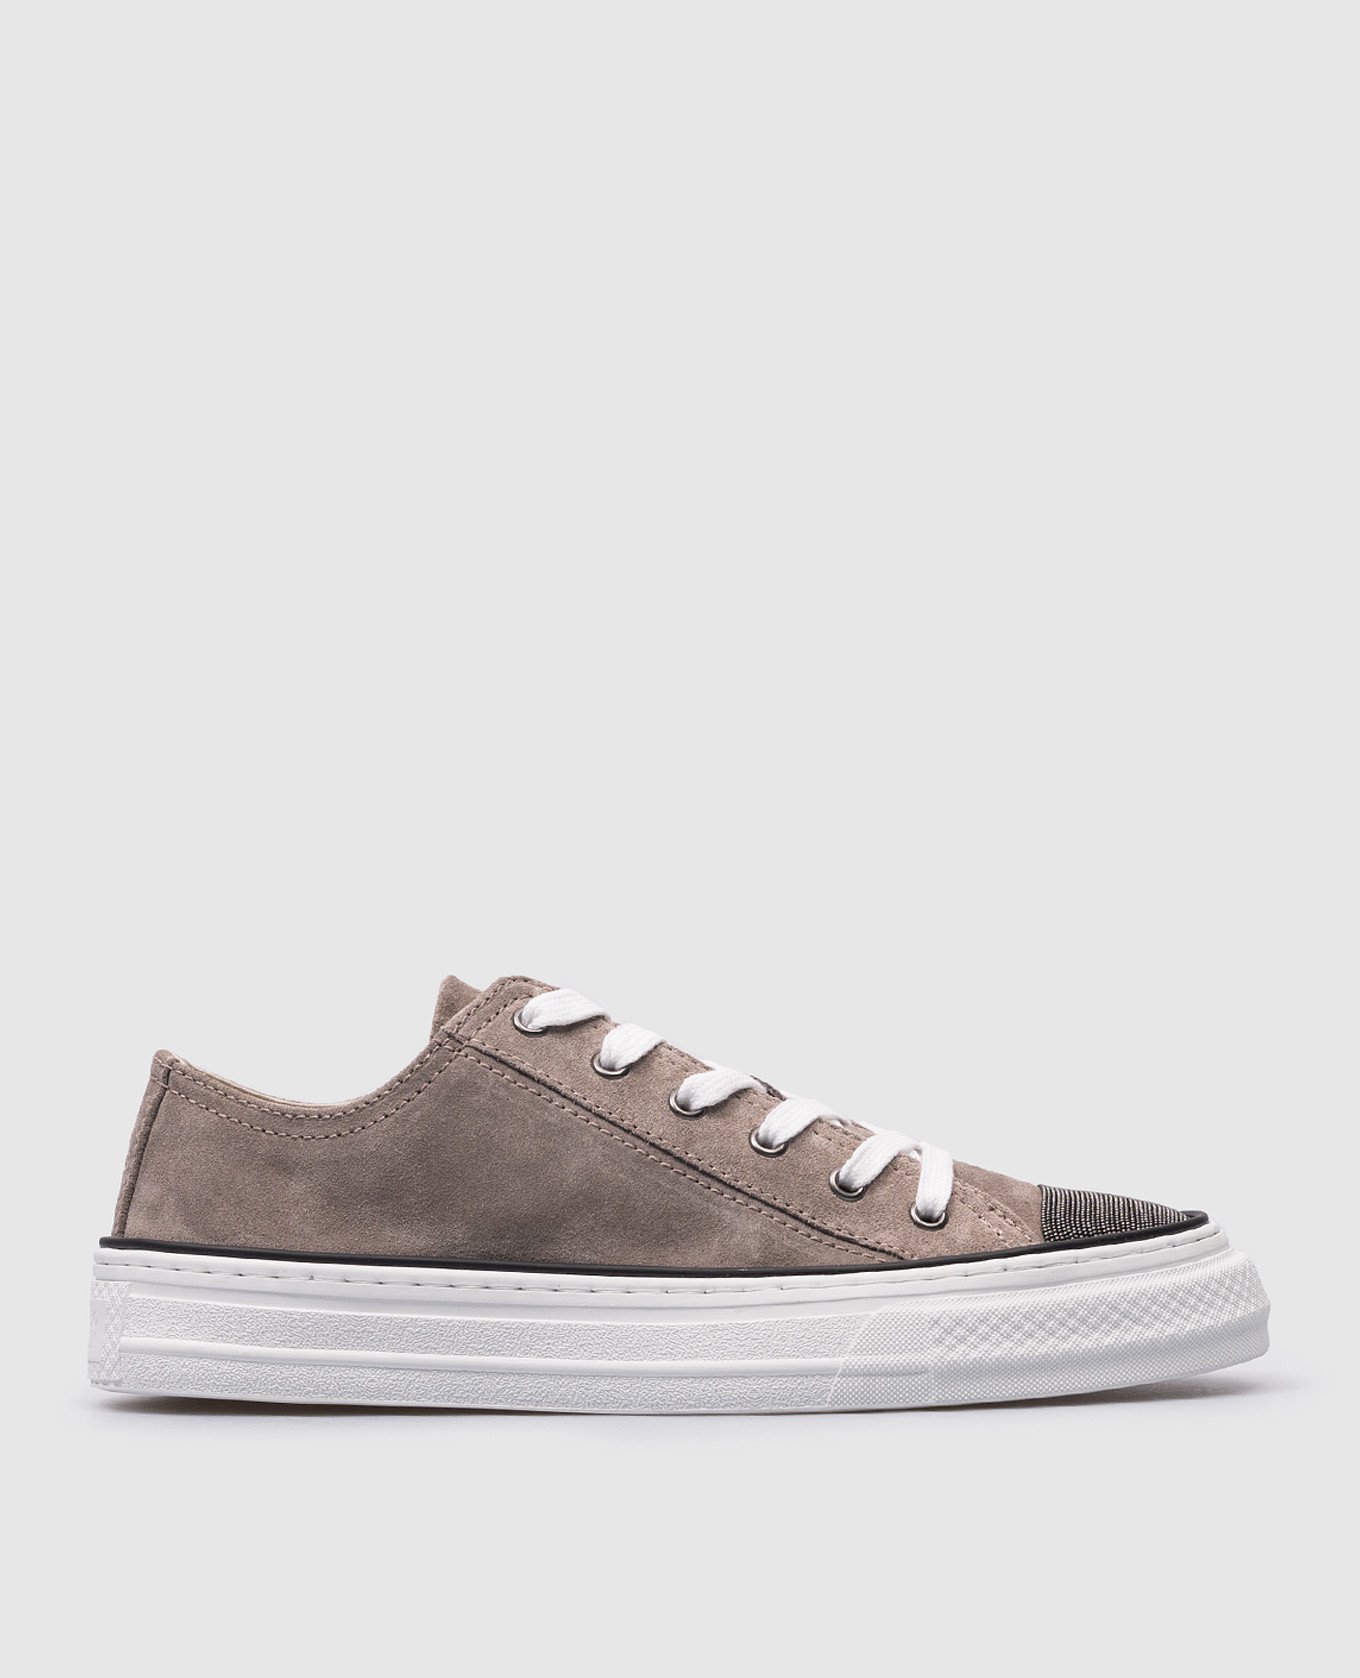 Gray suede sneakers with monil chain